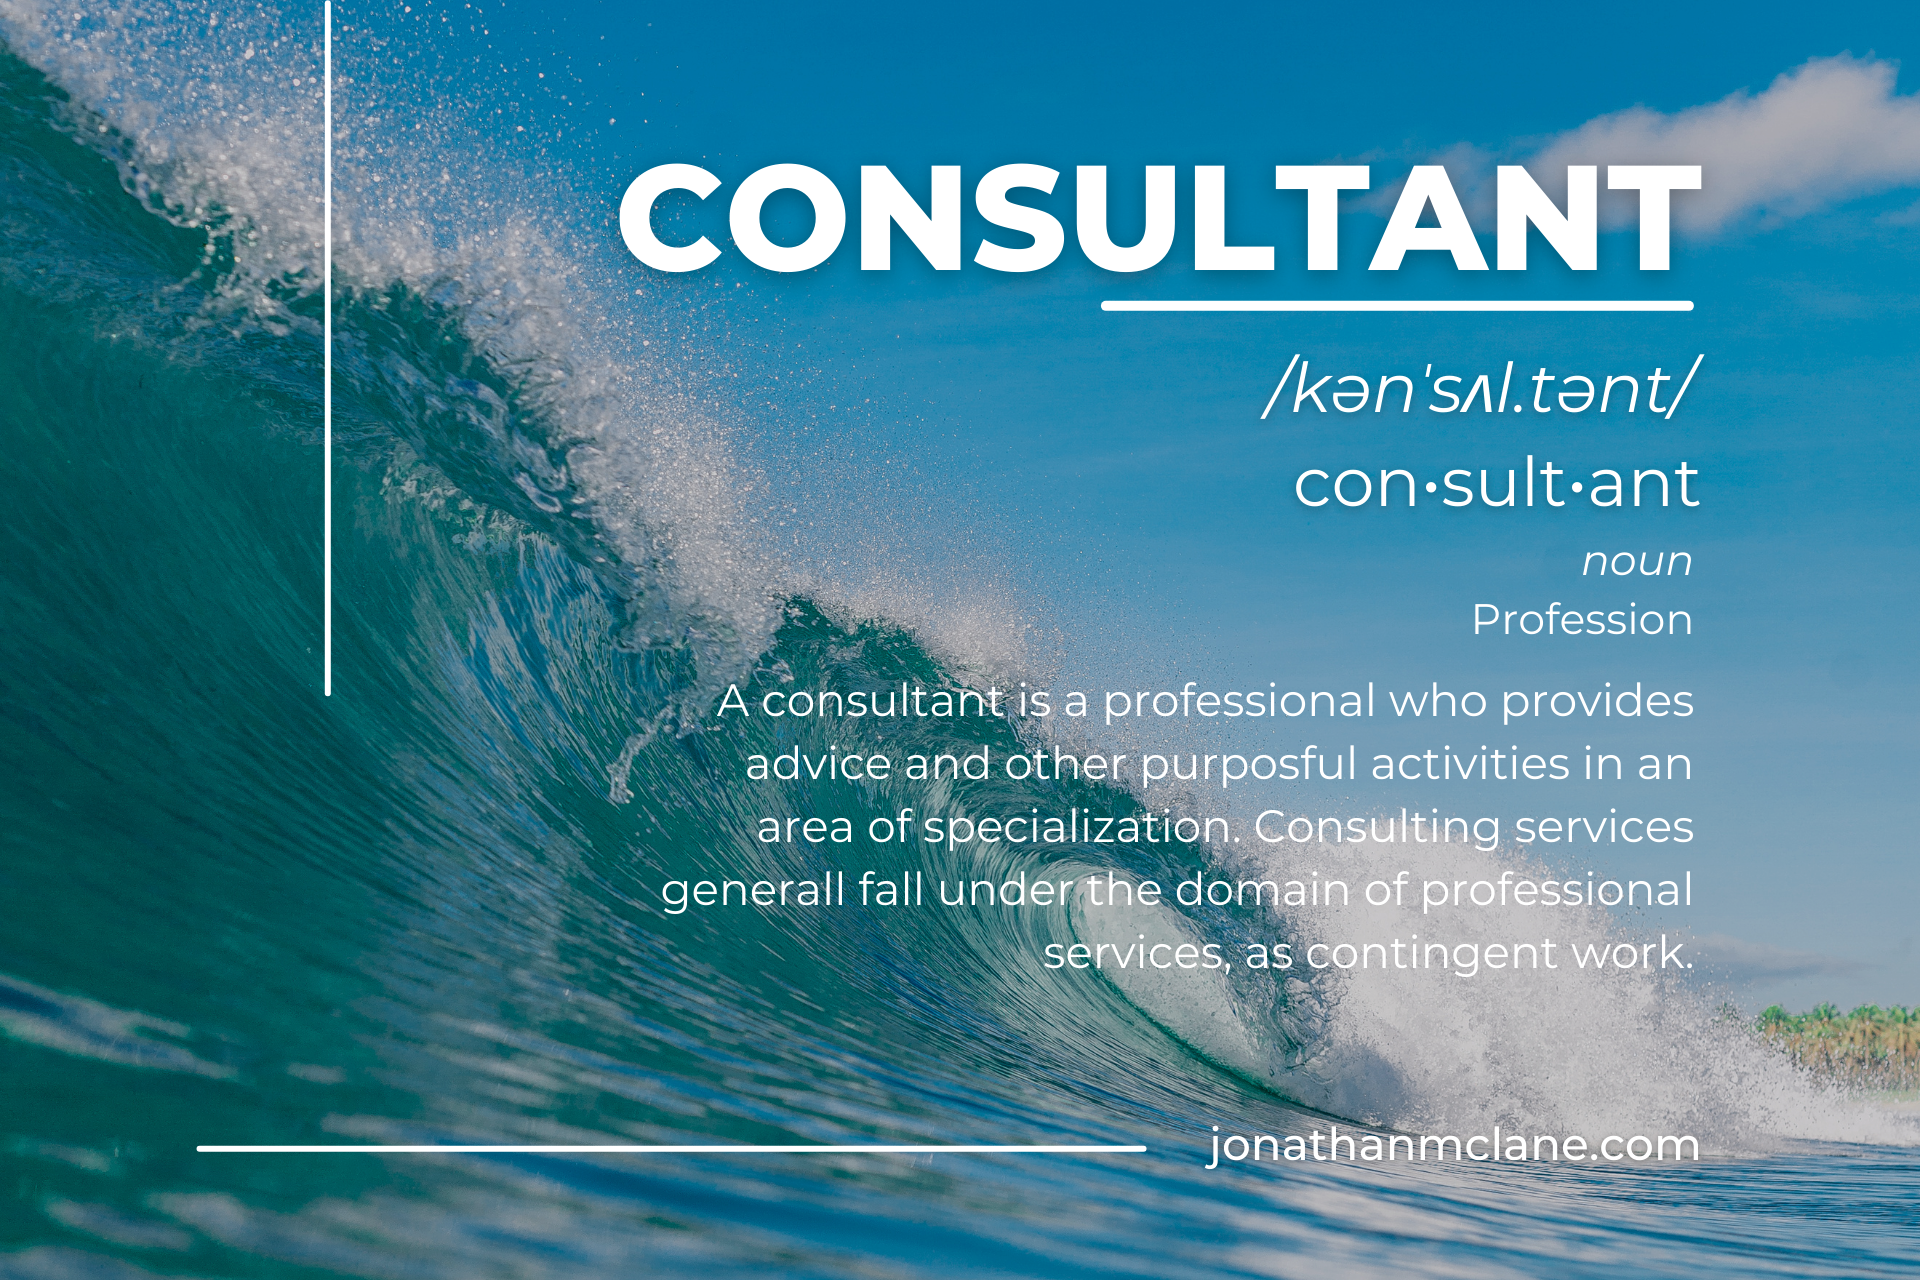 noun Profession A consultant is a professional who provides advice and other purposful activities in an area of specialization. Consulting services generall fall under the domain of professional services, as contingent work.